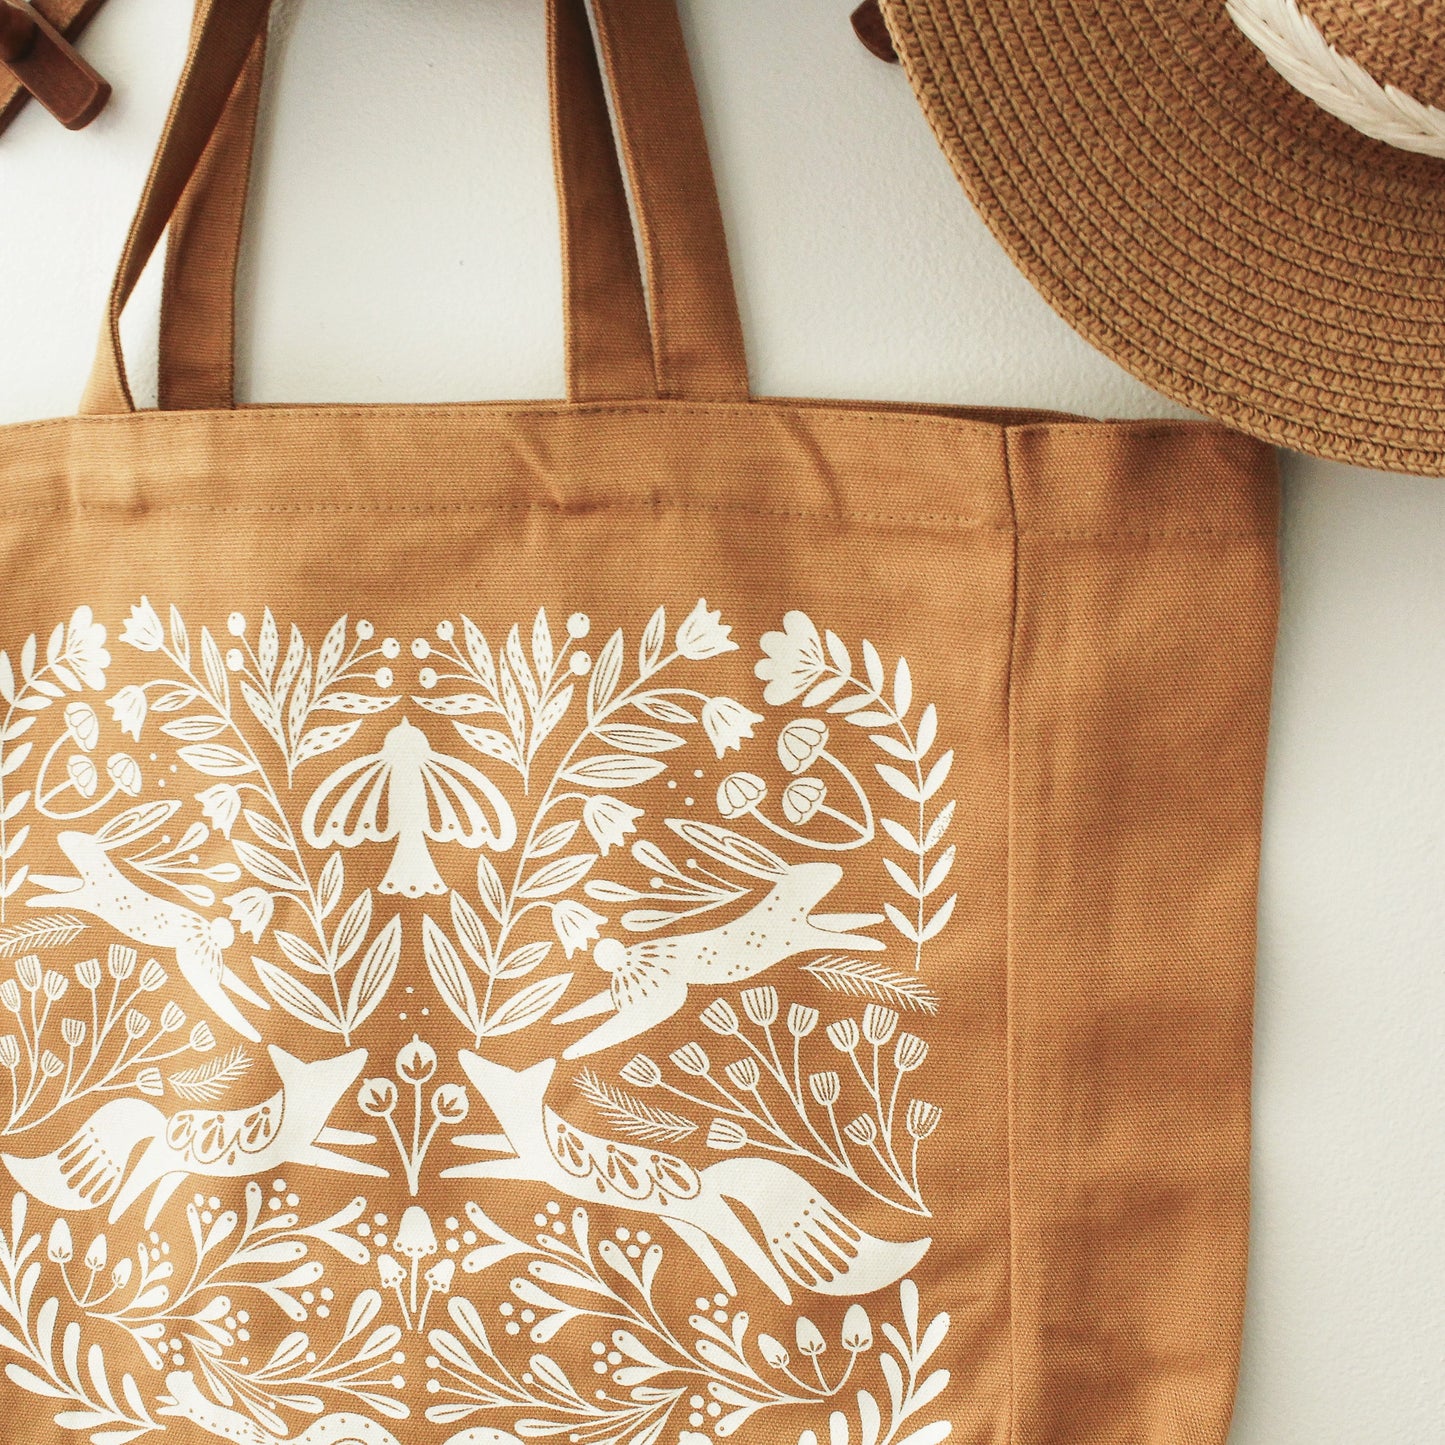 detailed shot of tote bag in burnt orange showing the detailed screen printed design of flowers, mushrooms and forest animals.